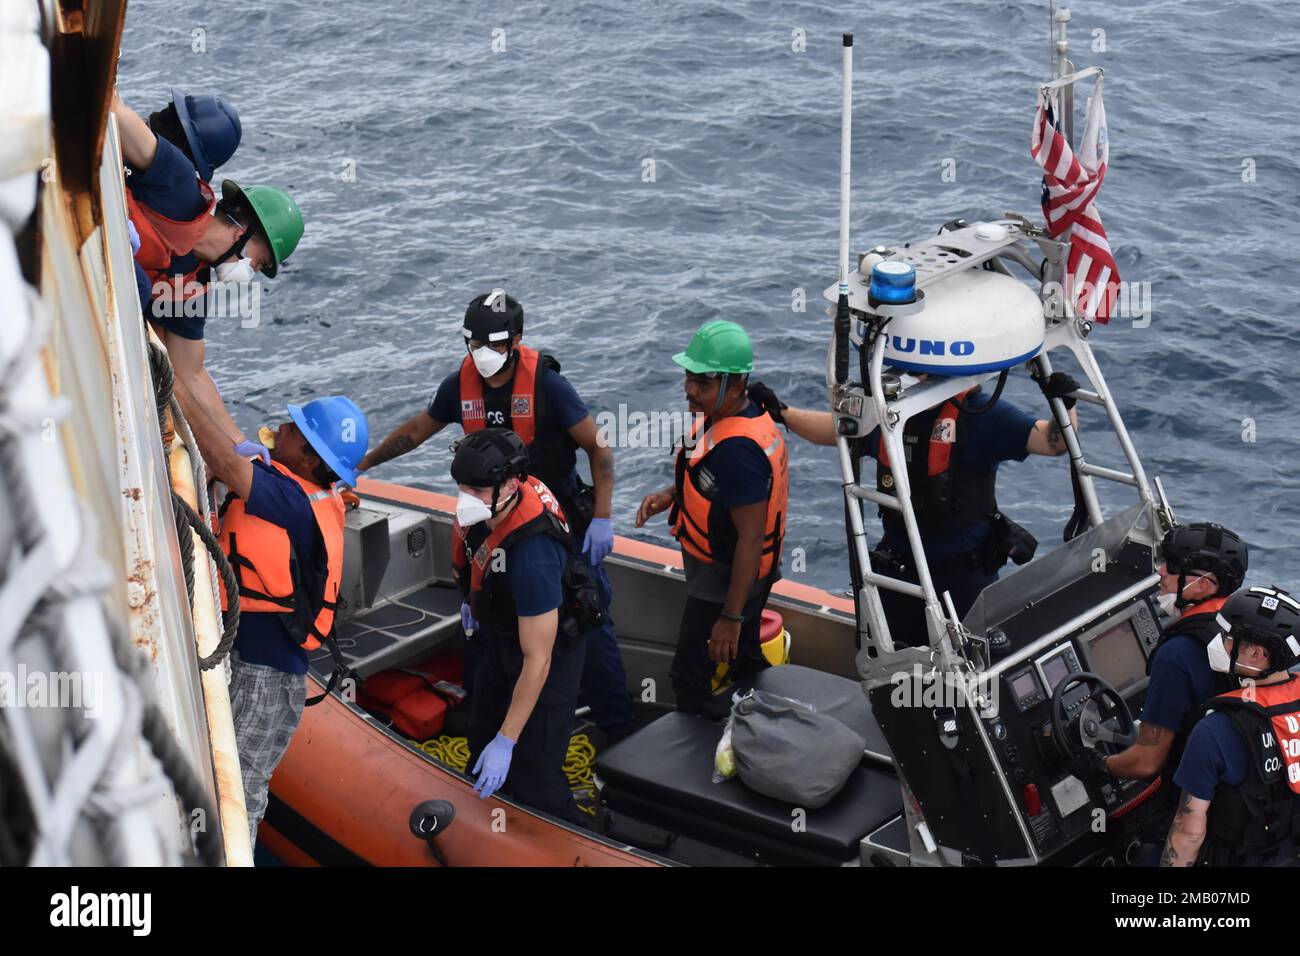 The crew of U.S. Coast Guard Cutter Steadfast helps two survivors who were lost at sea for 23 days come aboard the cutter June 8, 2022. The imperiled mariners stated that they were fishermen who had been adrift for 23 days after their vessel was beset by weather. Stock Photo